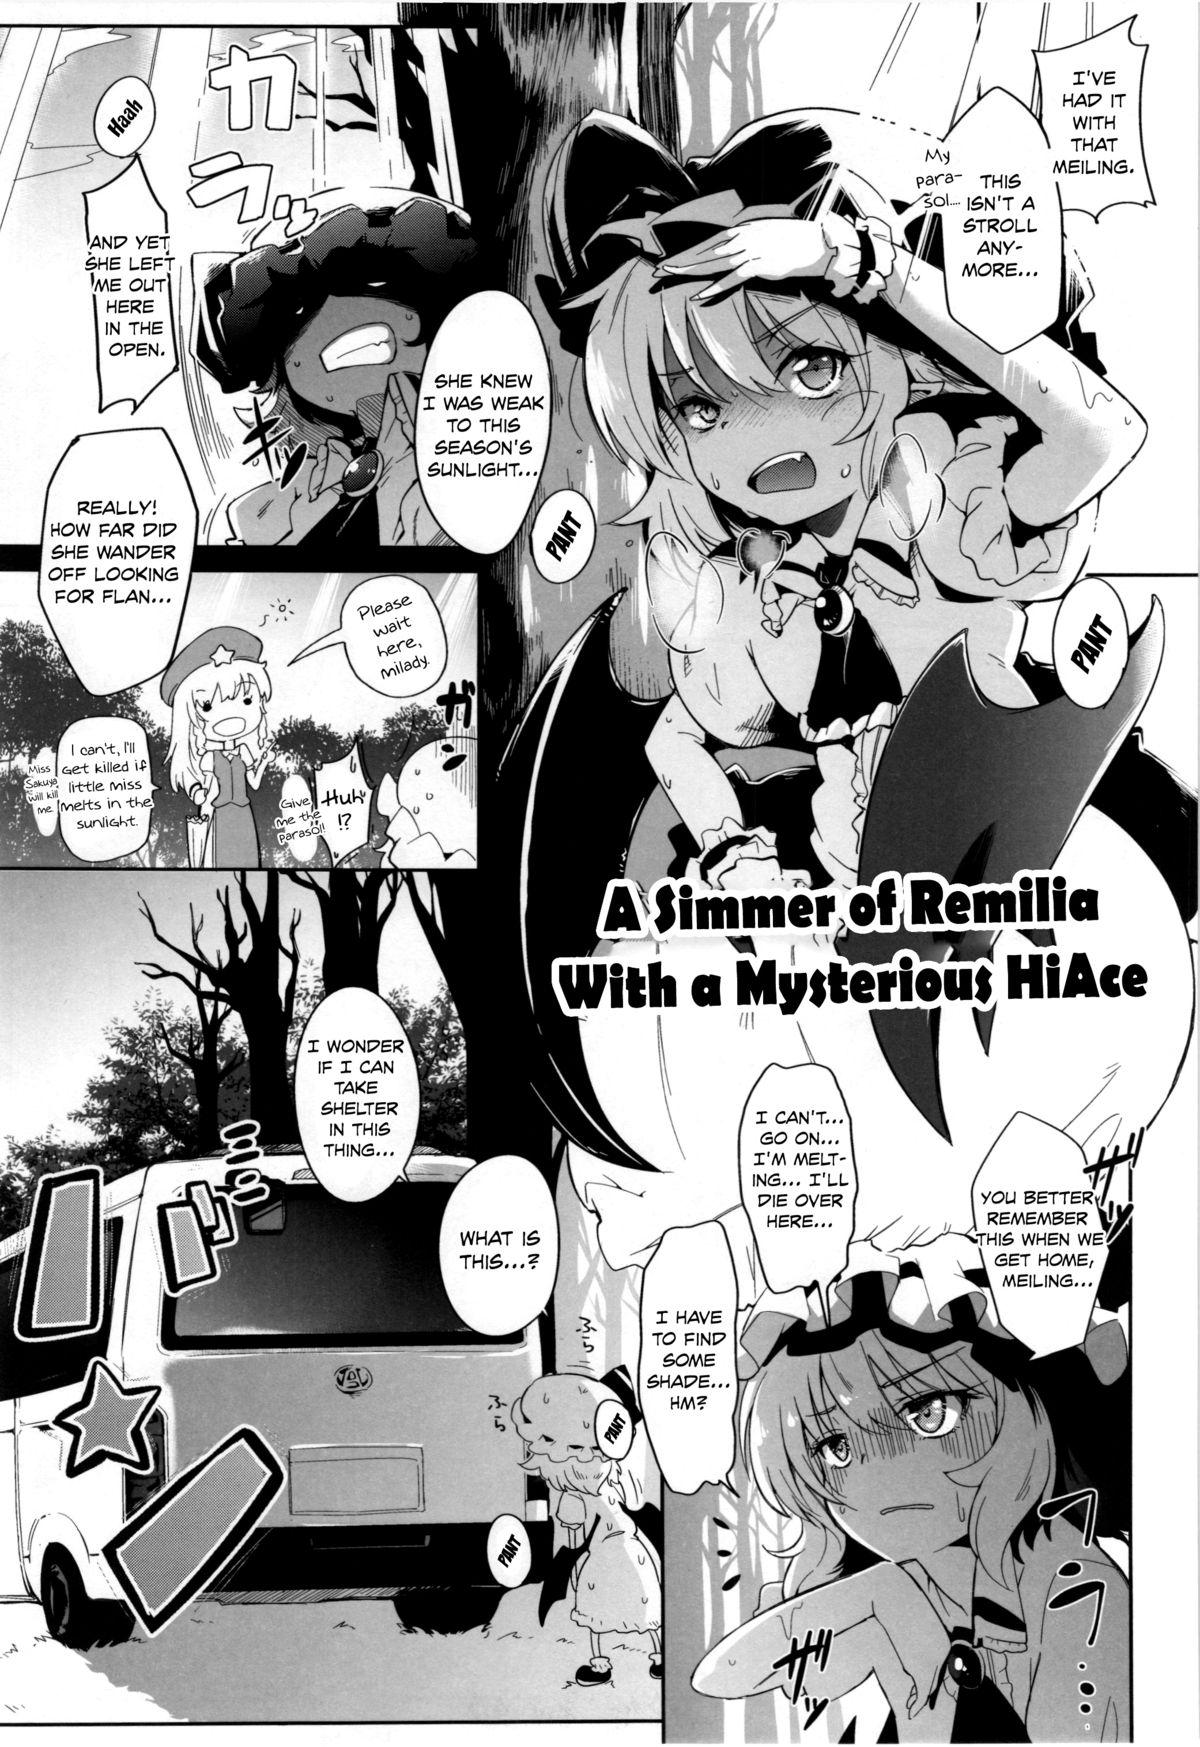 People Having Sex Remilia to Fushigi no HiAce | A Simmer of Remilia With a Mysterious HiAce - Touhou project Milf Fuck - Page 1